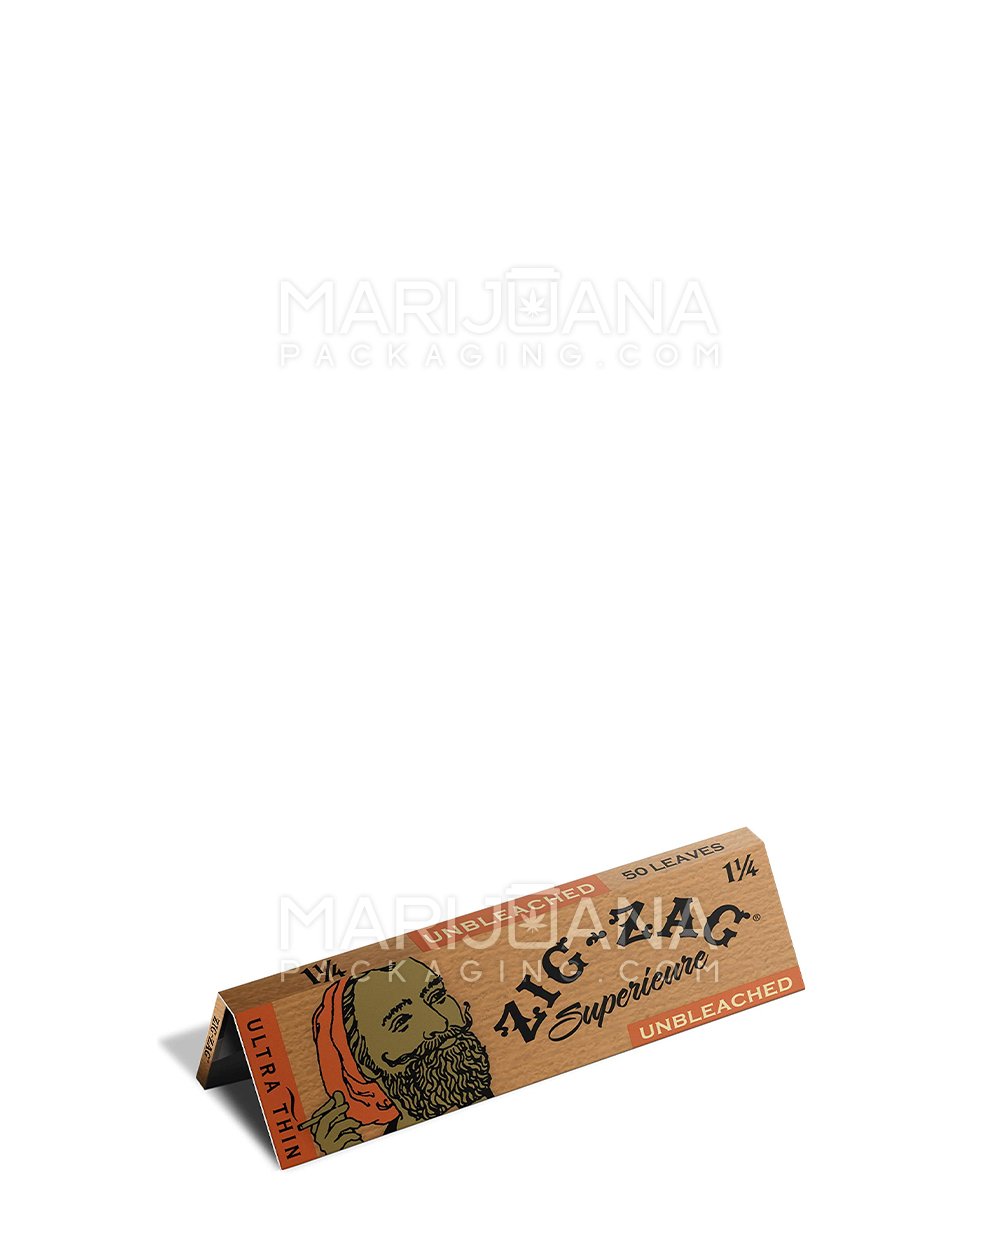 ZIG ZAG | 'Retail Display' Unbleached 1 1/4 Size Rolling Papers | 78mm - Unbleached Paper - 24 Count - 2